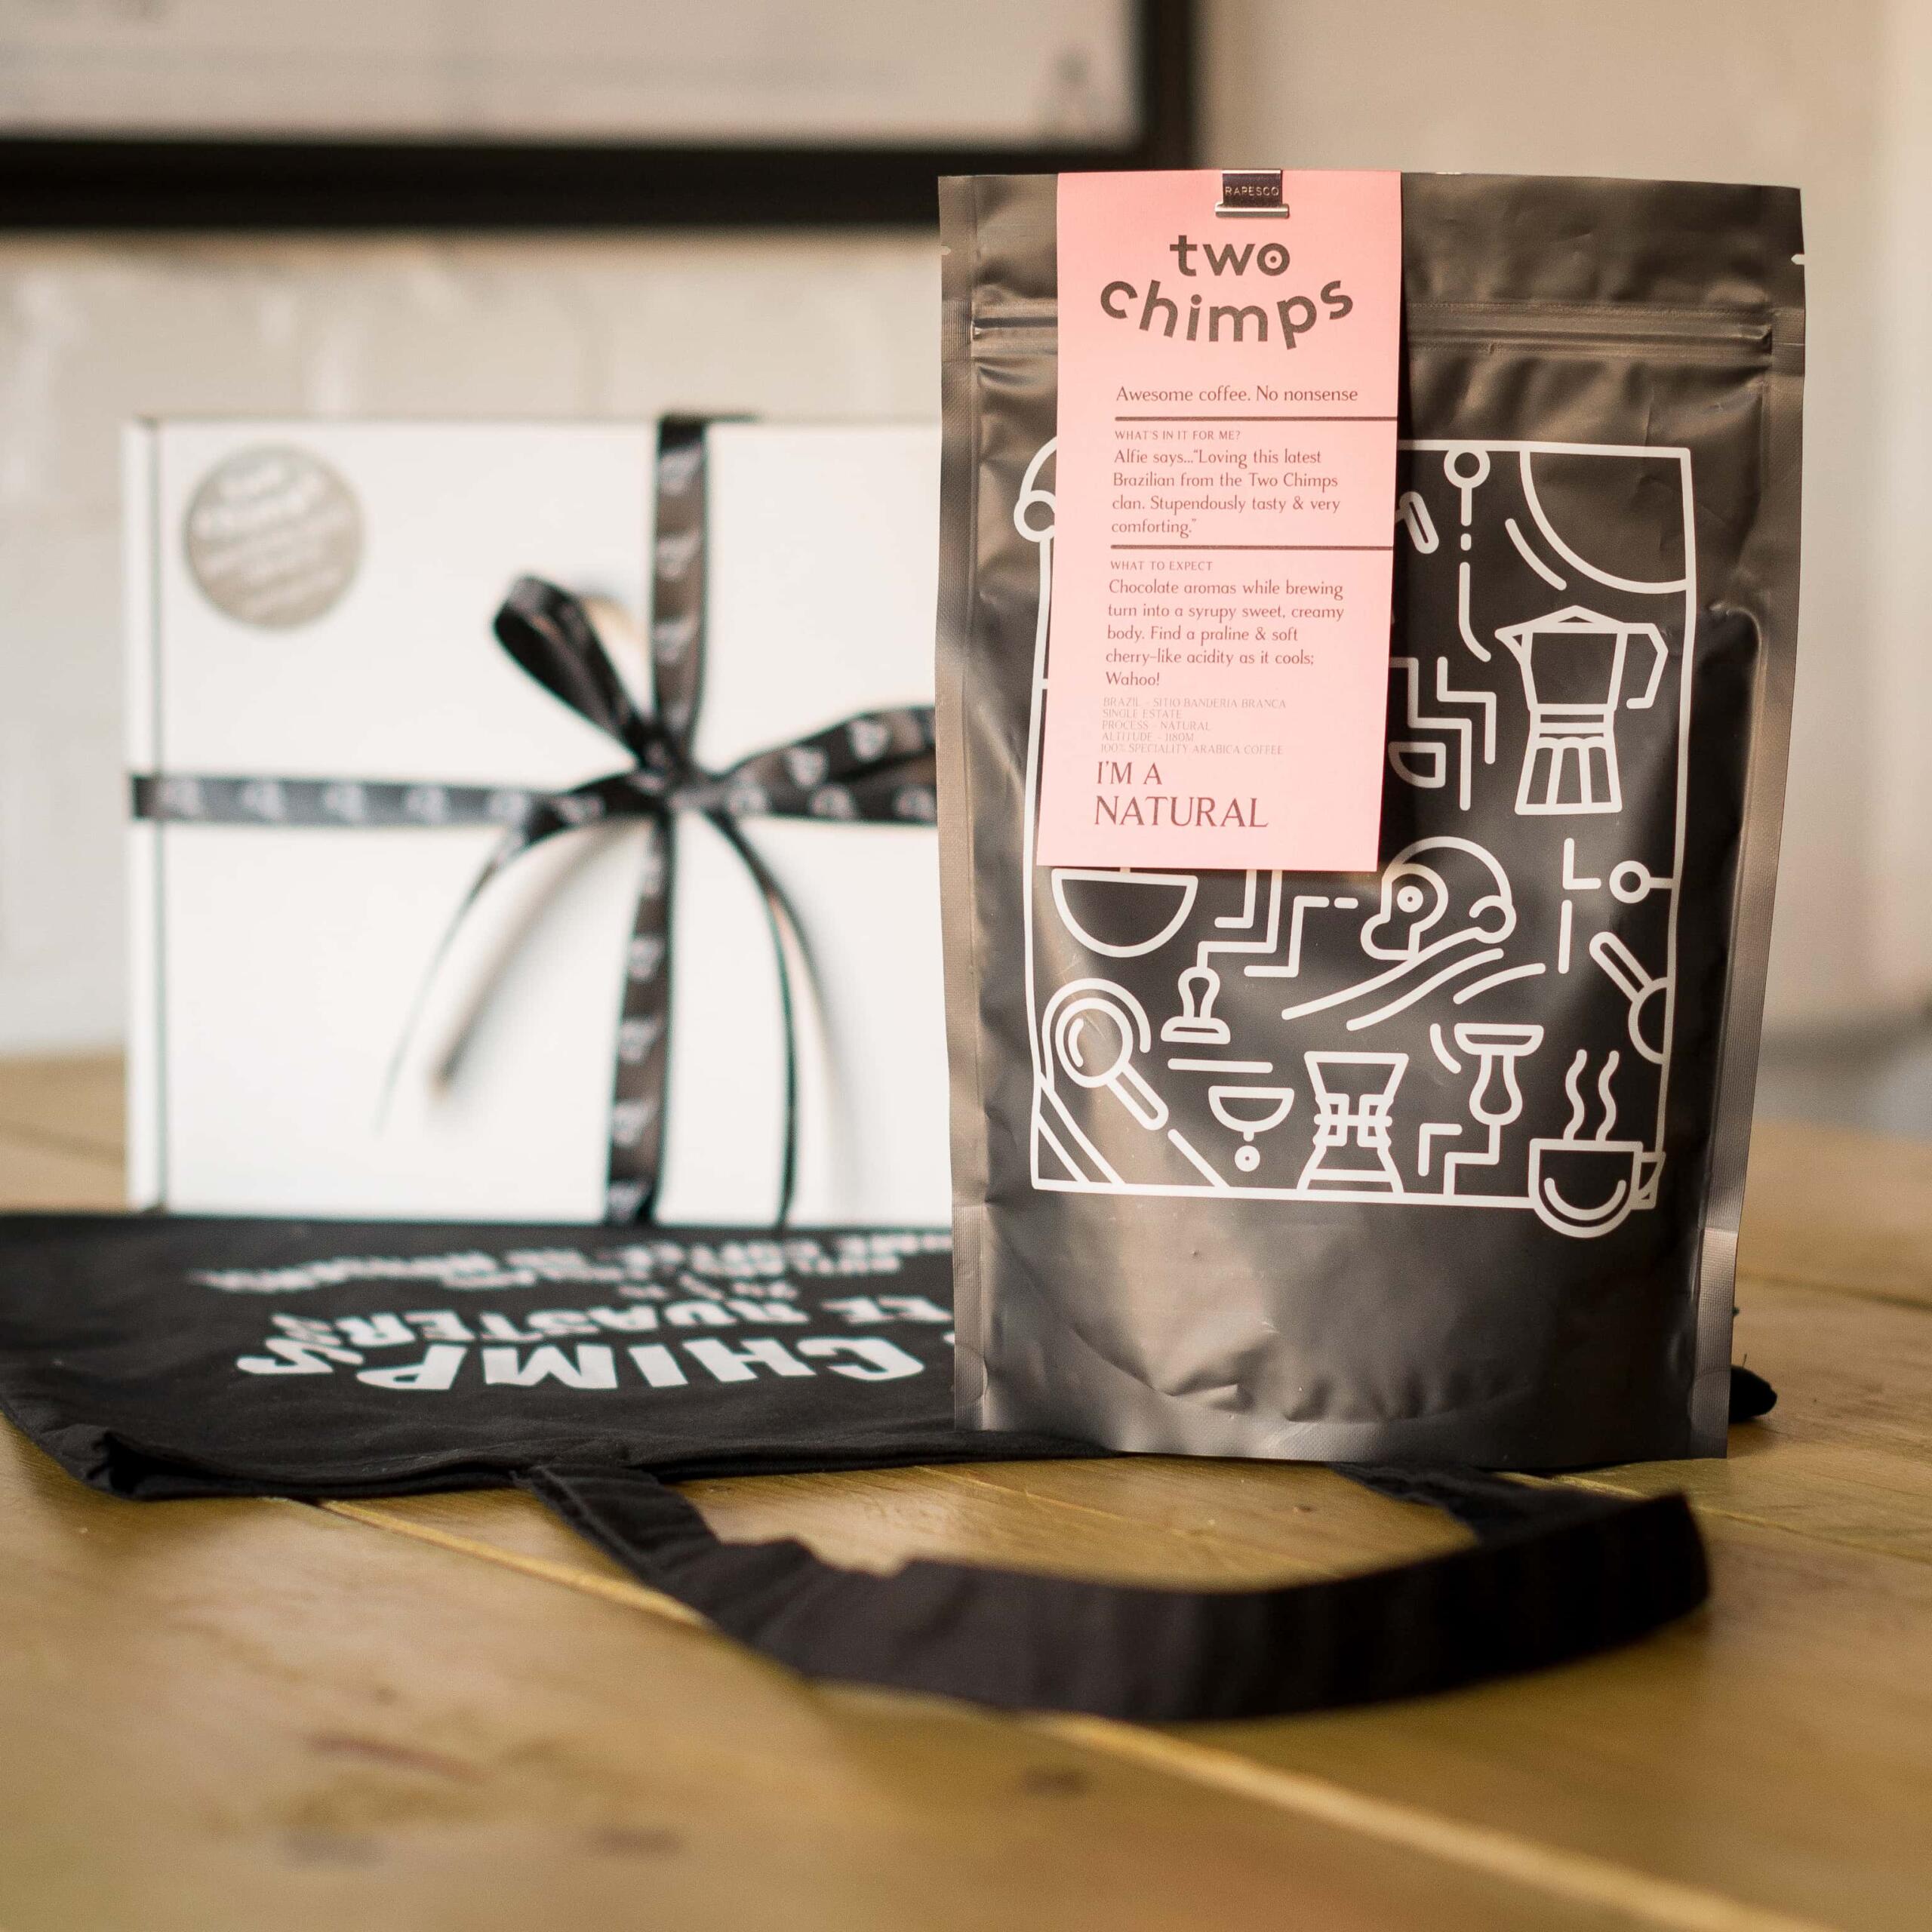 Two chimps coffee, tote bag and gift box